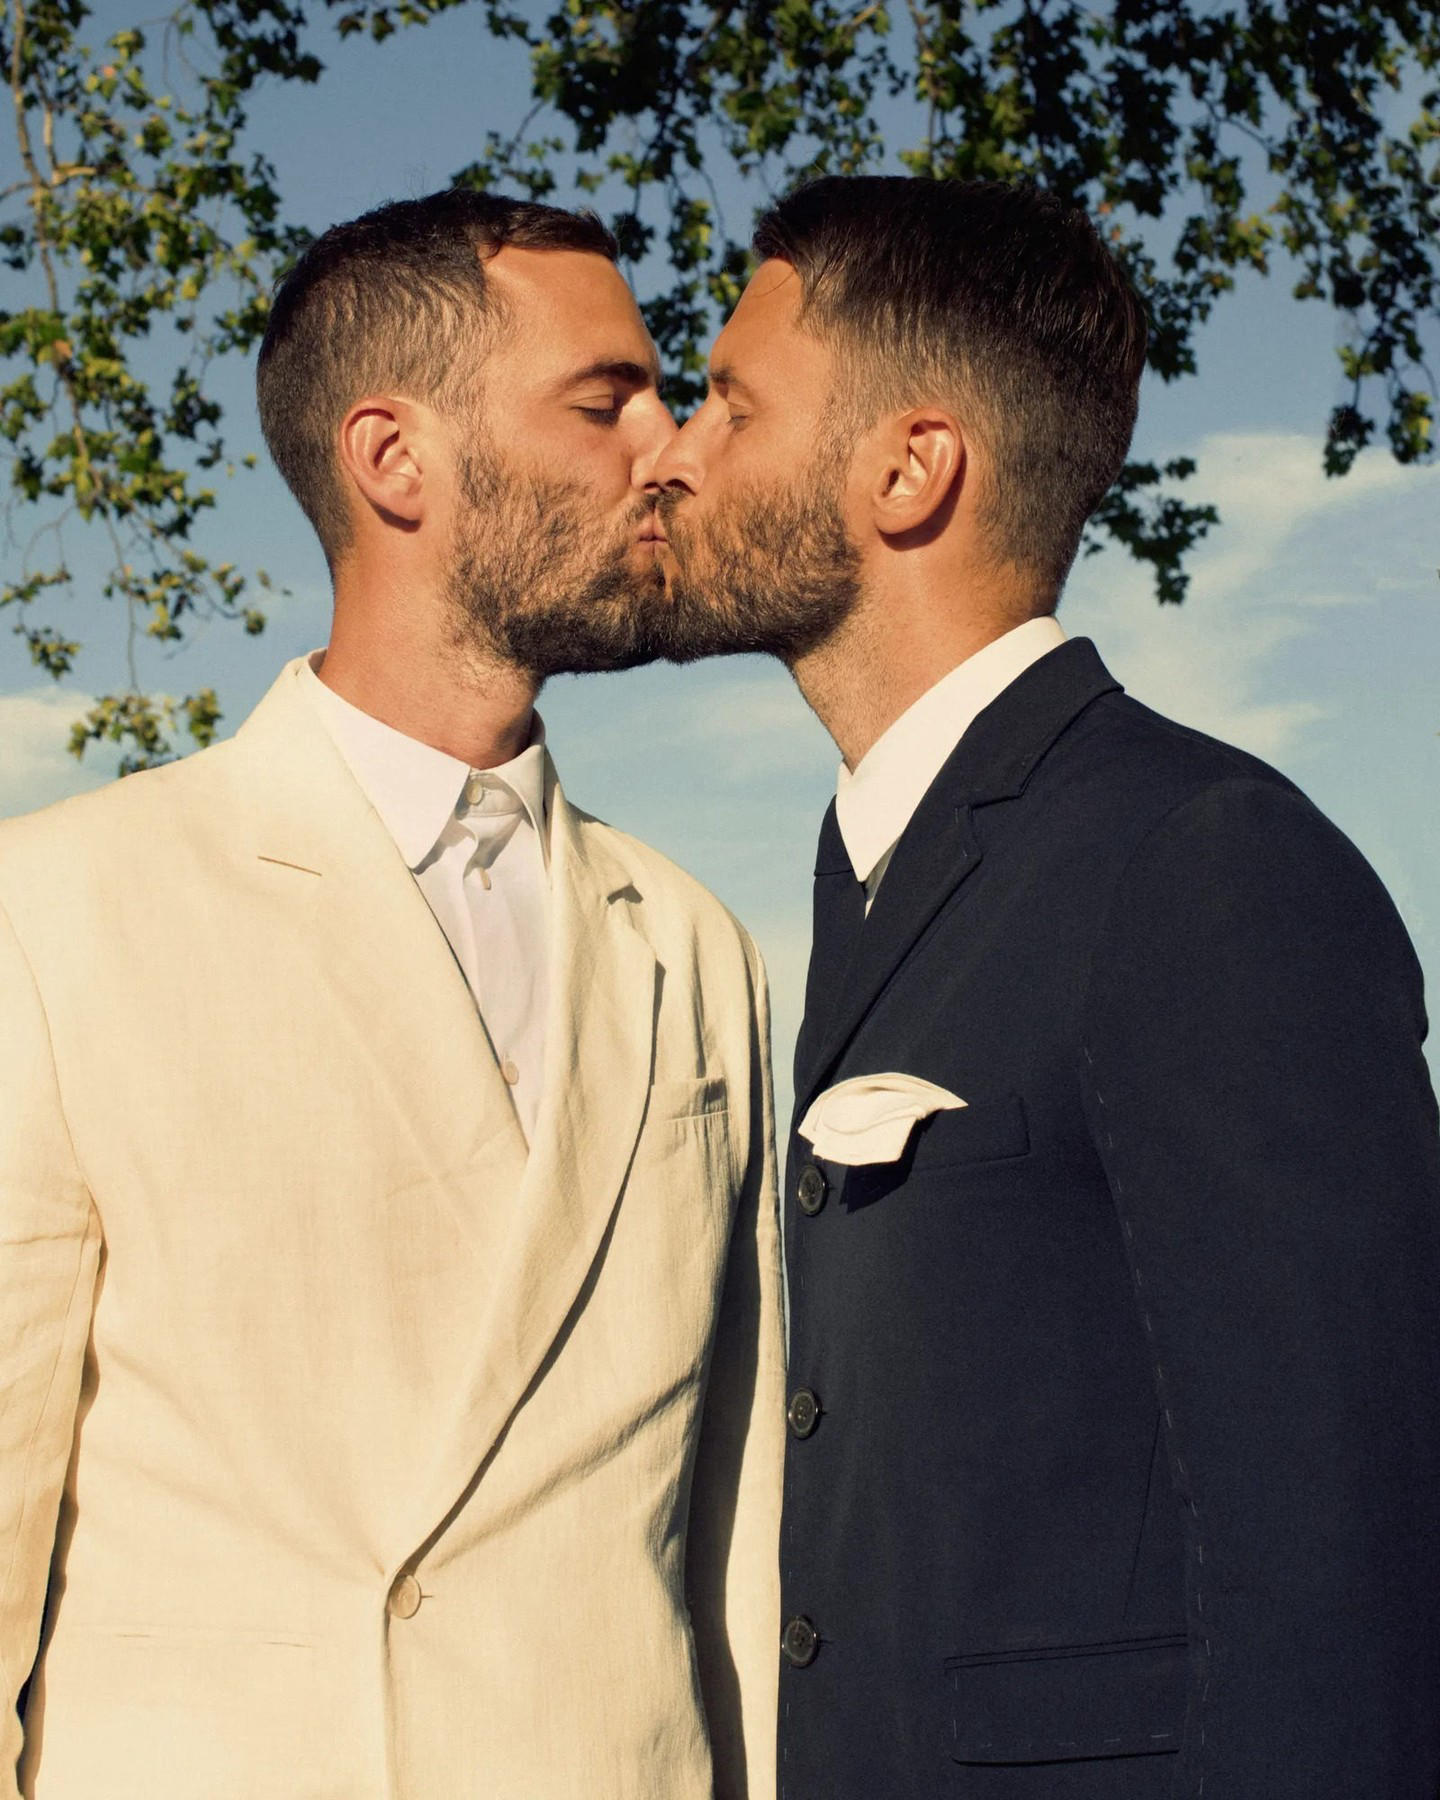 Vogue - On Saturday, August 27, Simon Porte #Jacquemus and Marco Maestri said “I do” in Charleval, a